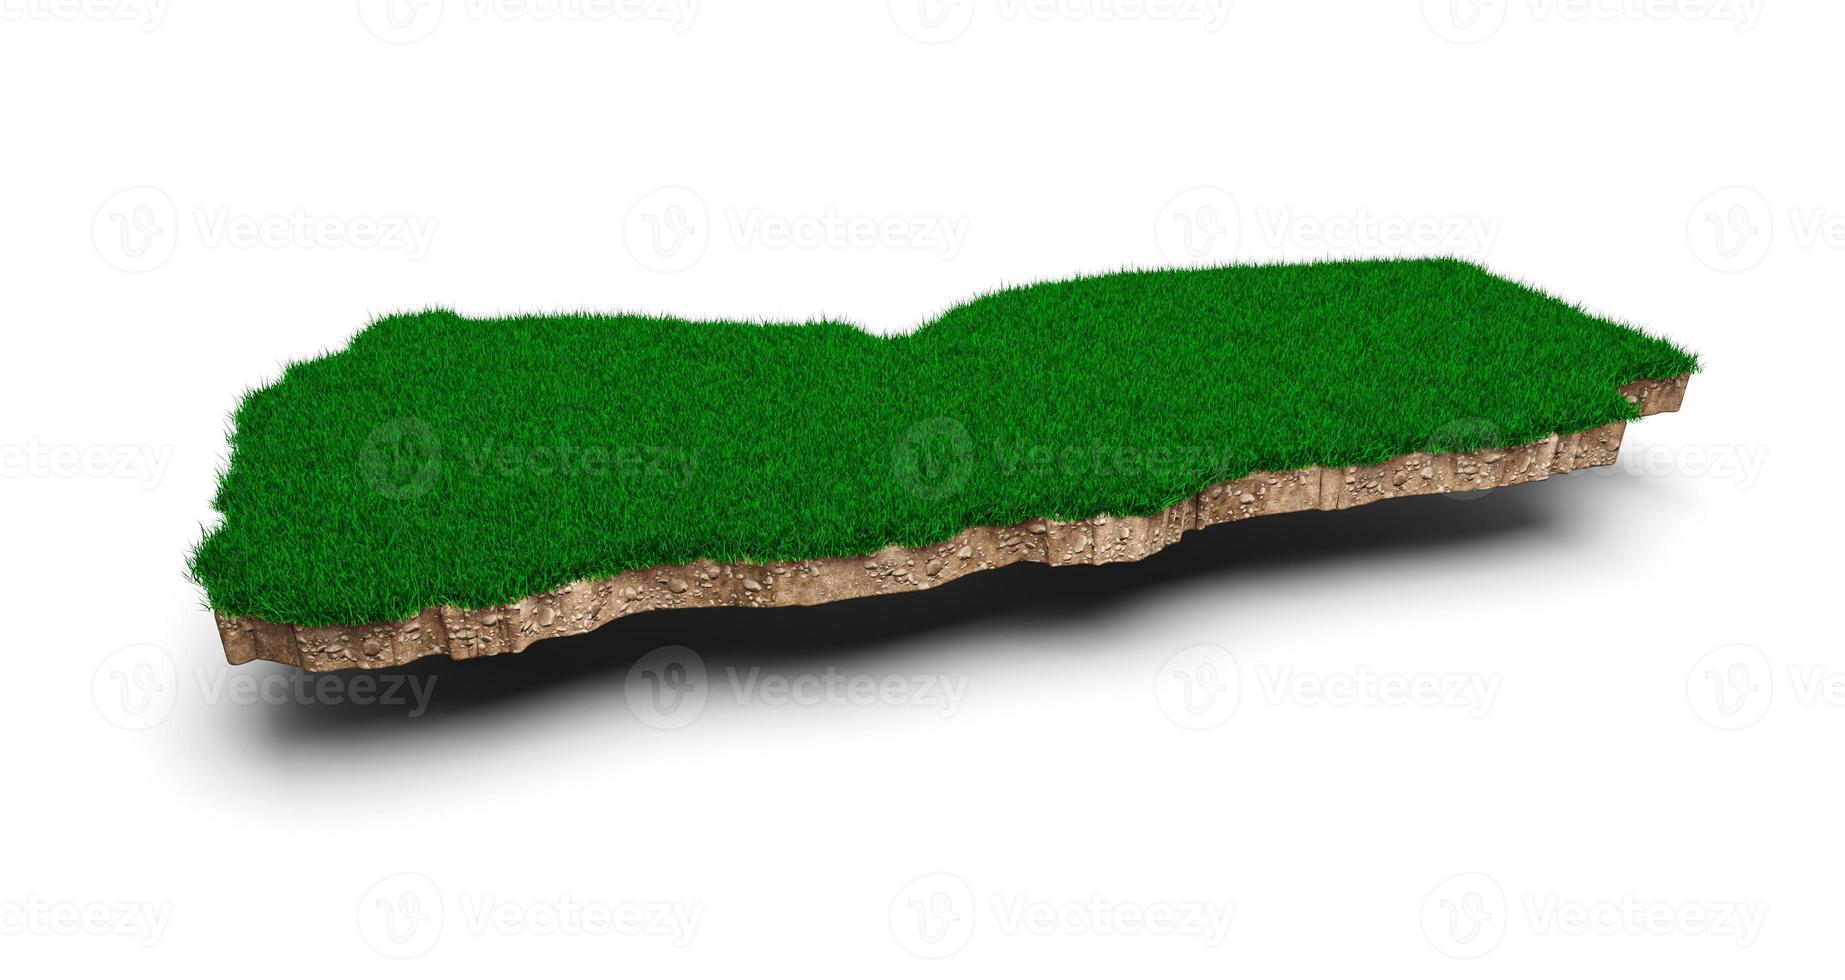 Yemen Map soil land geology cross section with green grass and Rock ground texture 3d illustration photo